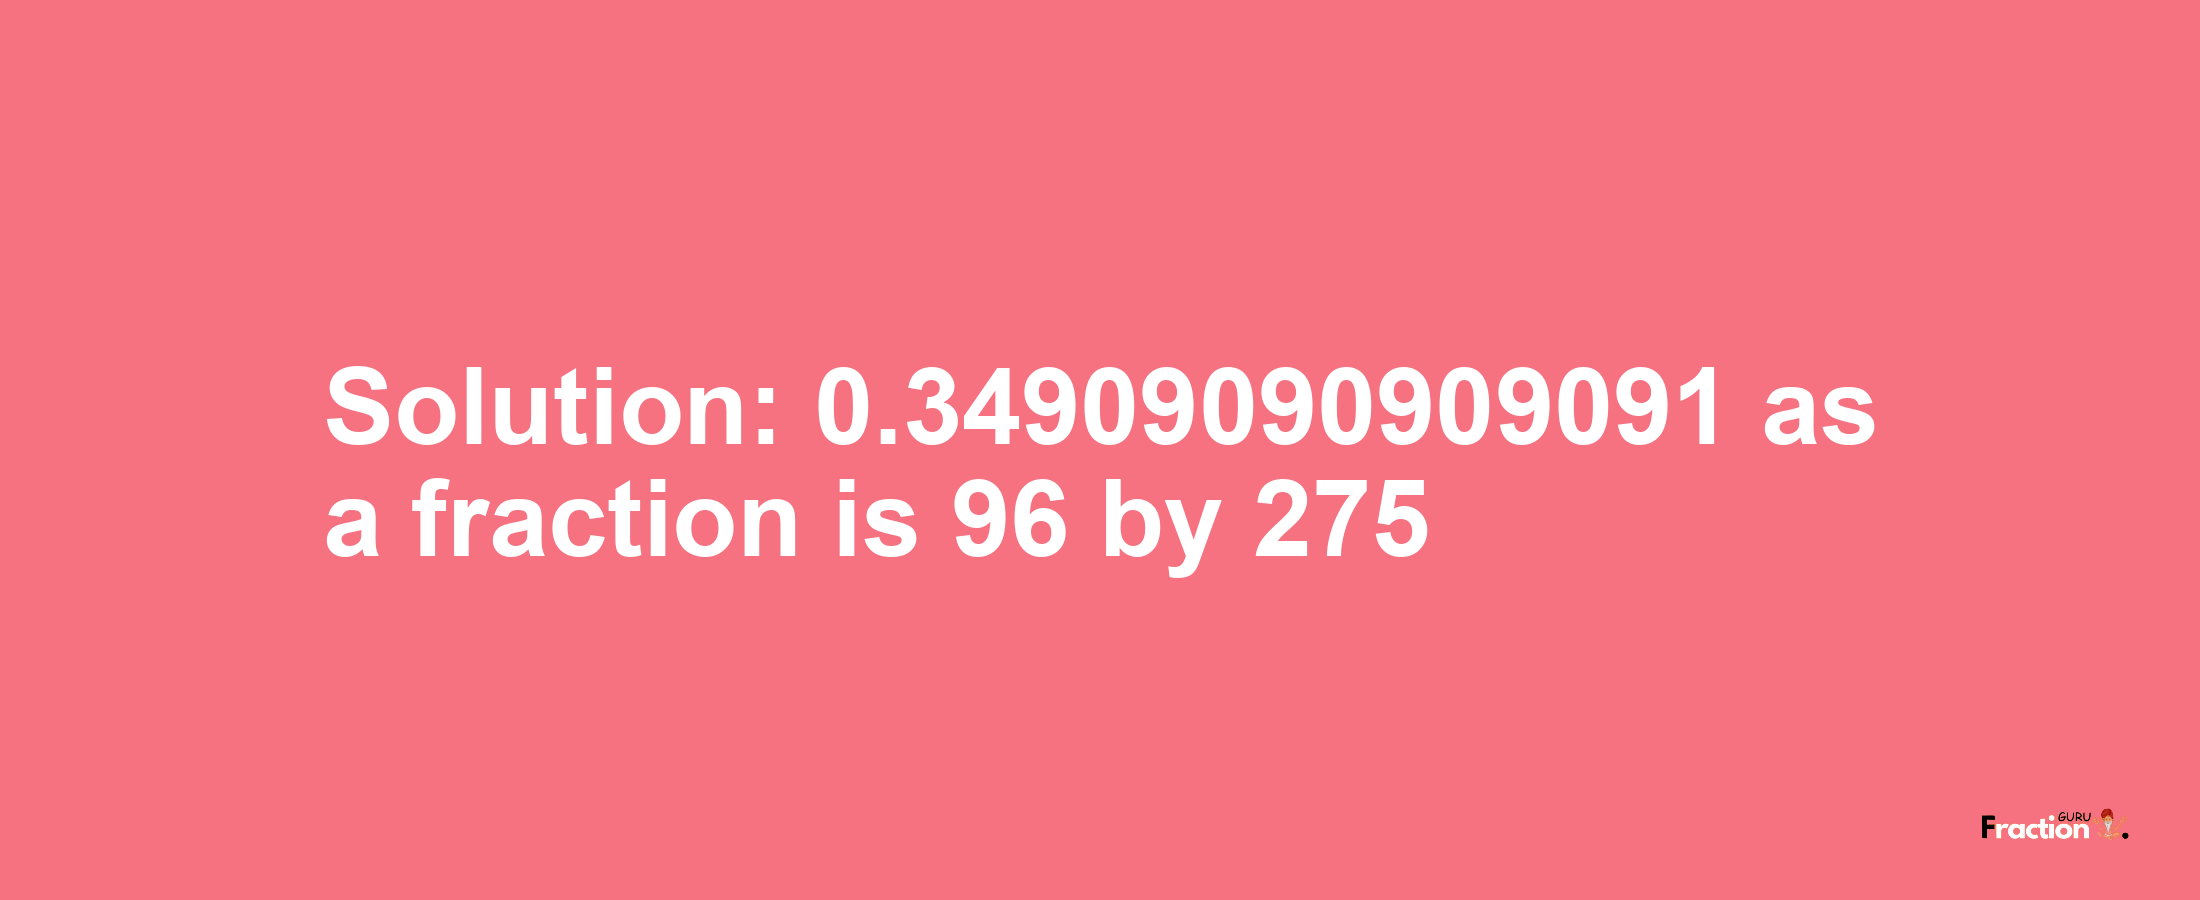 Solution:0.34909090909091 as a fraction is 96/275